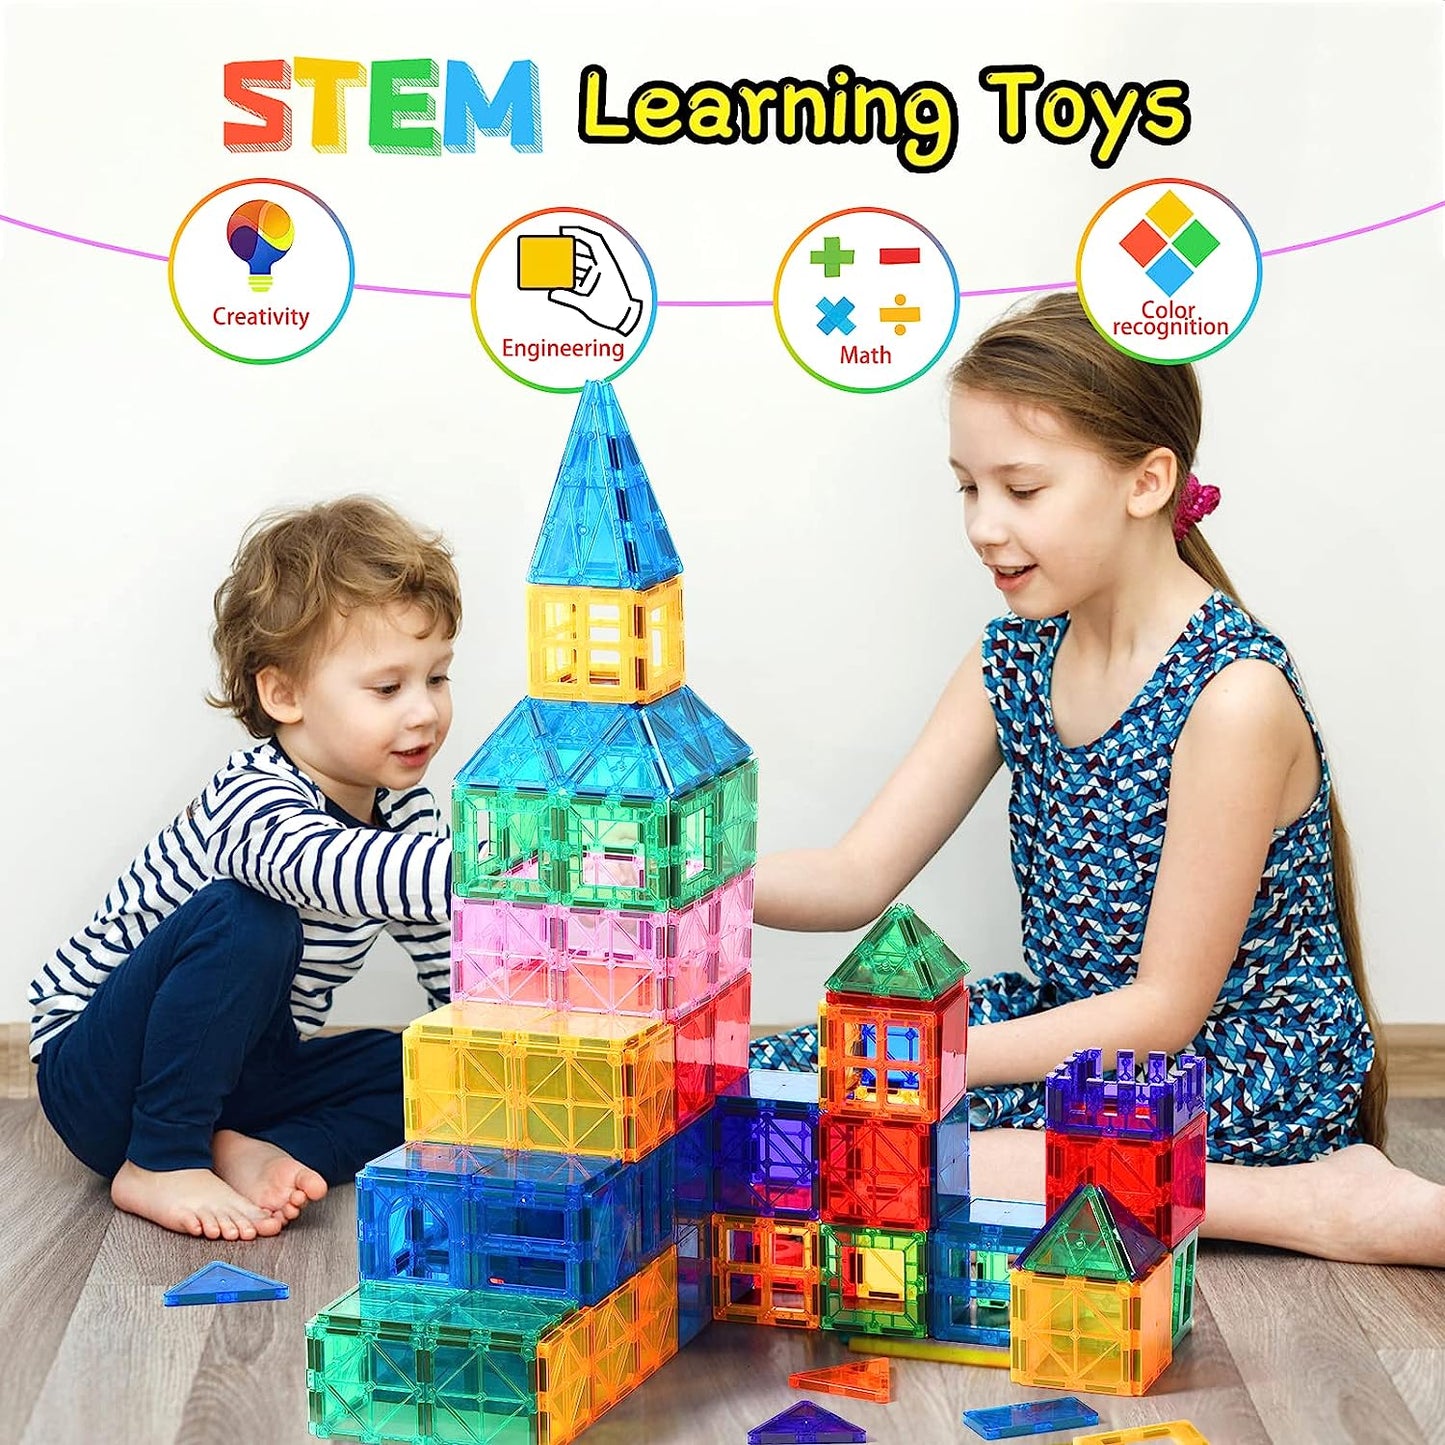 Magnetic Tiles, Safe and Sturdy Magnet Tiles Magnetic Building Blocks Toys for Kids Games, STEM Stacking Toys for Toddlers 3+, Preschool Sensory Learning Toys - Birthday Gifts for Boys & Girls